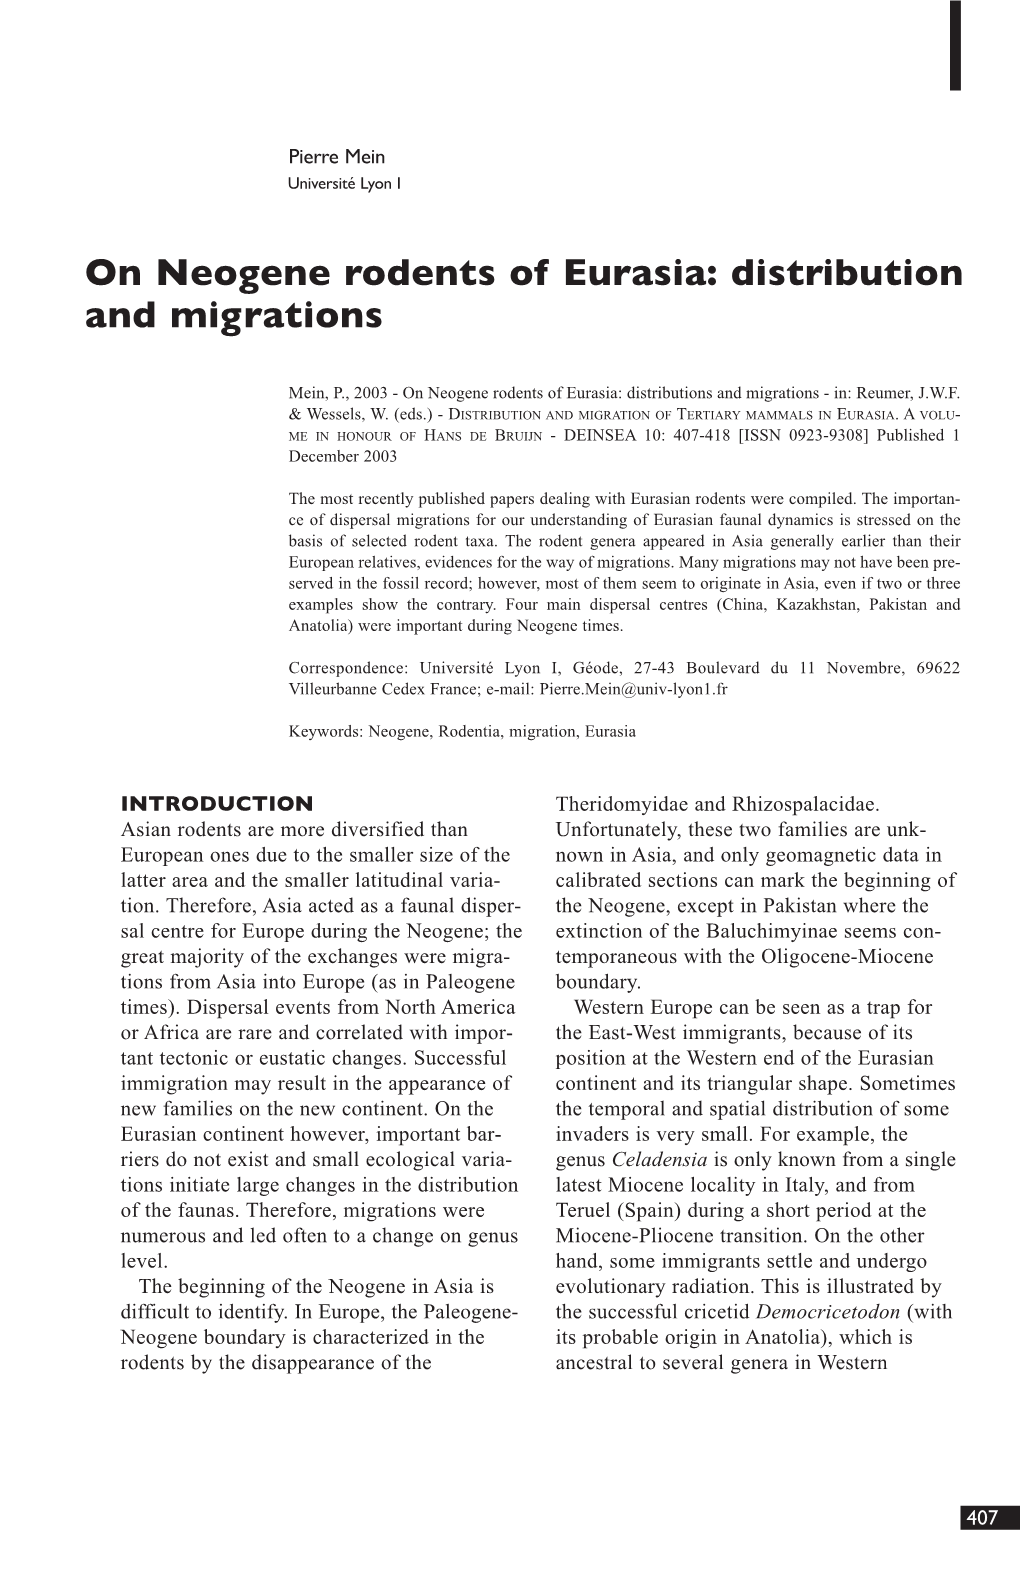 On Neogene Rodents of Eurasia: Distribution and Migrations